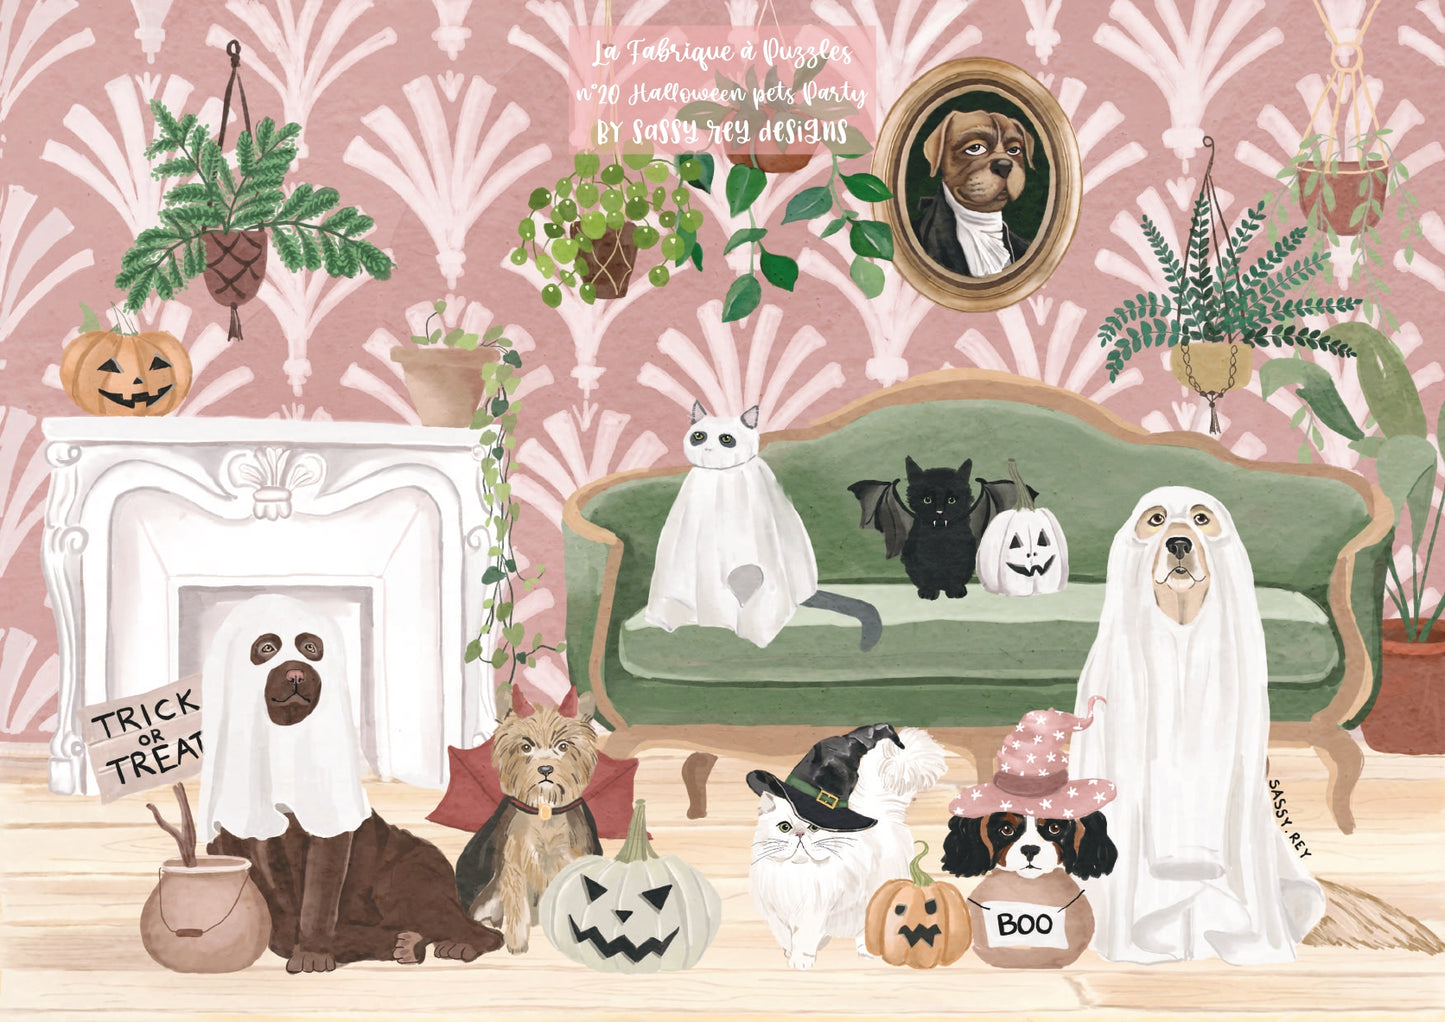 Puzzle n#19 "Halloween pets Party" 500 pieces by Sarah Reyes